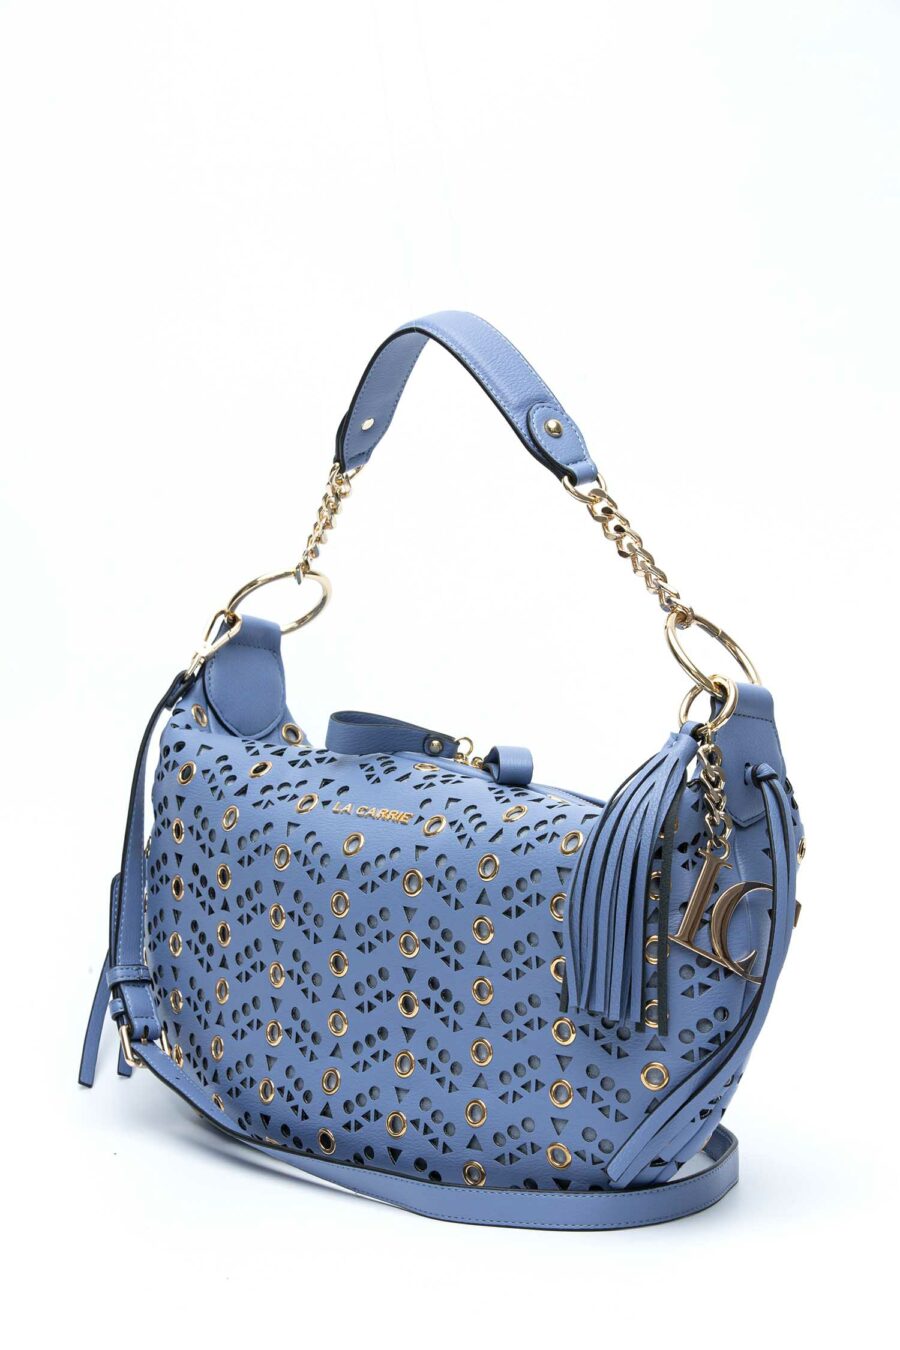 LA CARRIE-BORSA MOON LASER SYNTHETIC TUMBLED-LCTS355TBS DENIM